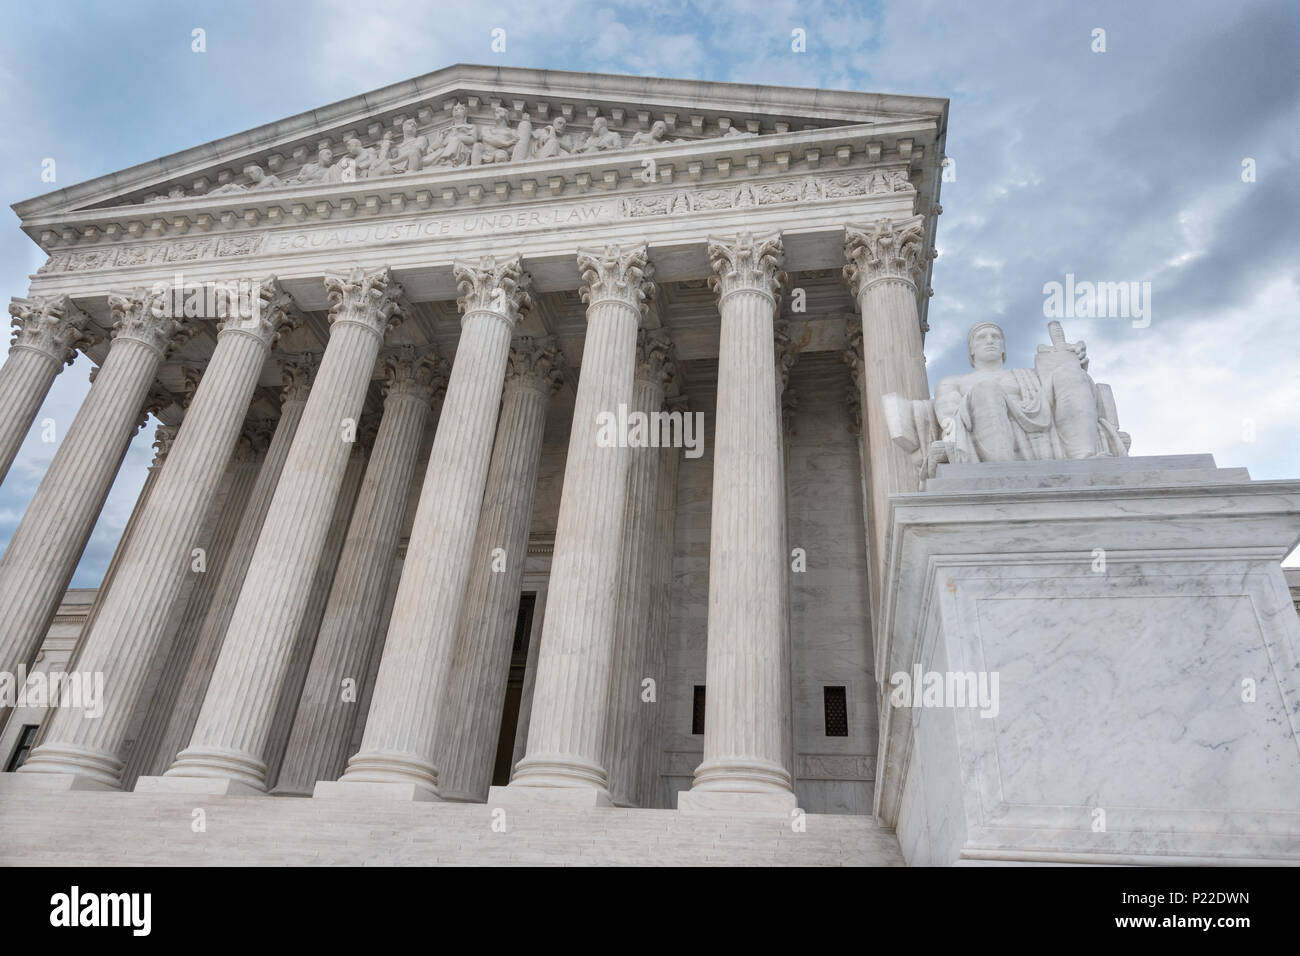 US Supreme Court Building, Authority of Law statue on right, Washington, DC Stock Photo